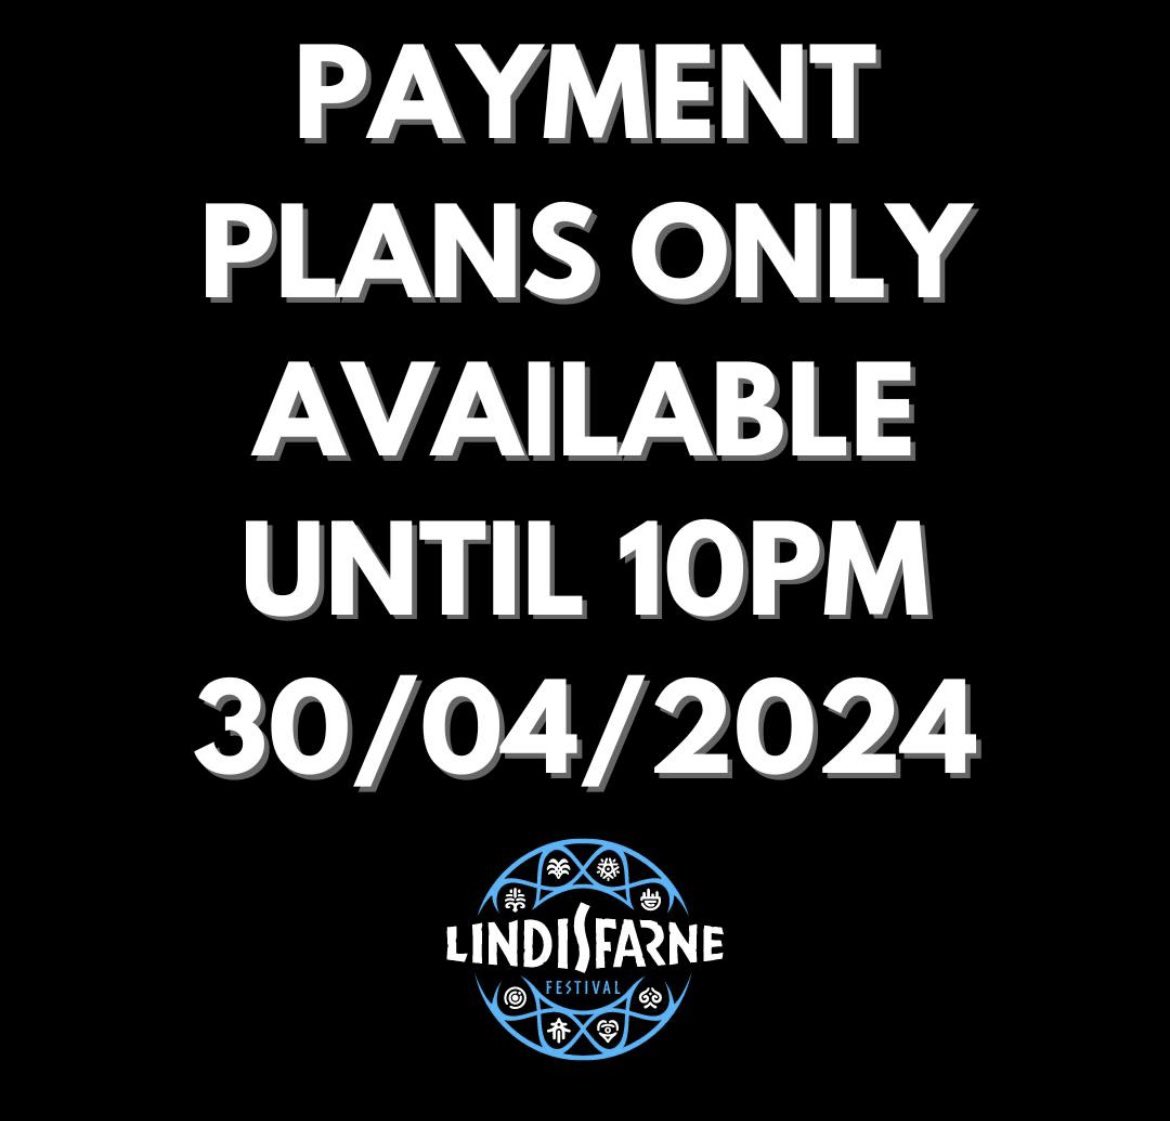 🚨 LAST CALL 🚨

After tonight, payment plans will not be available